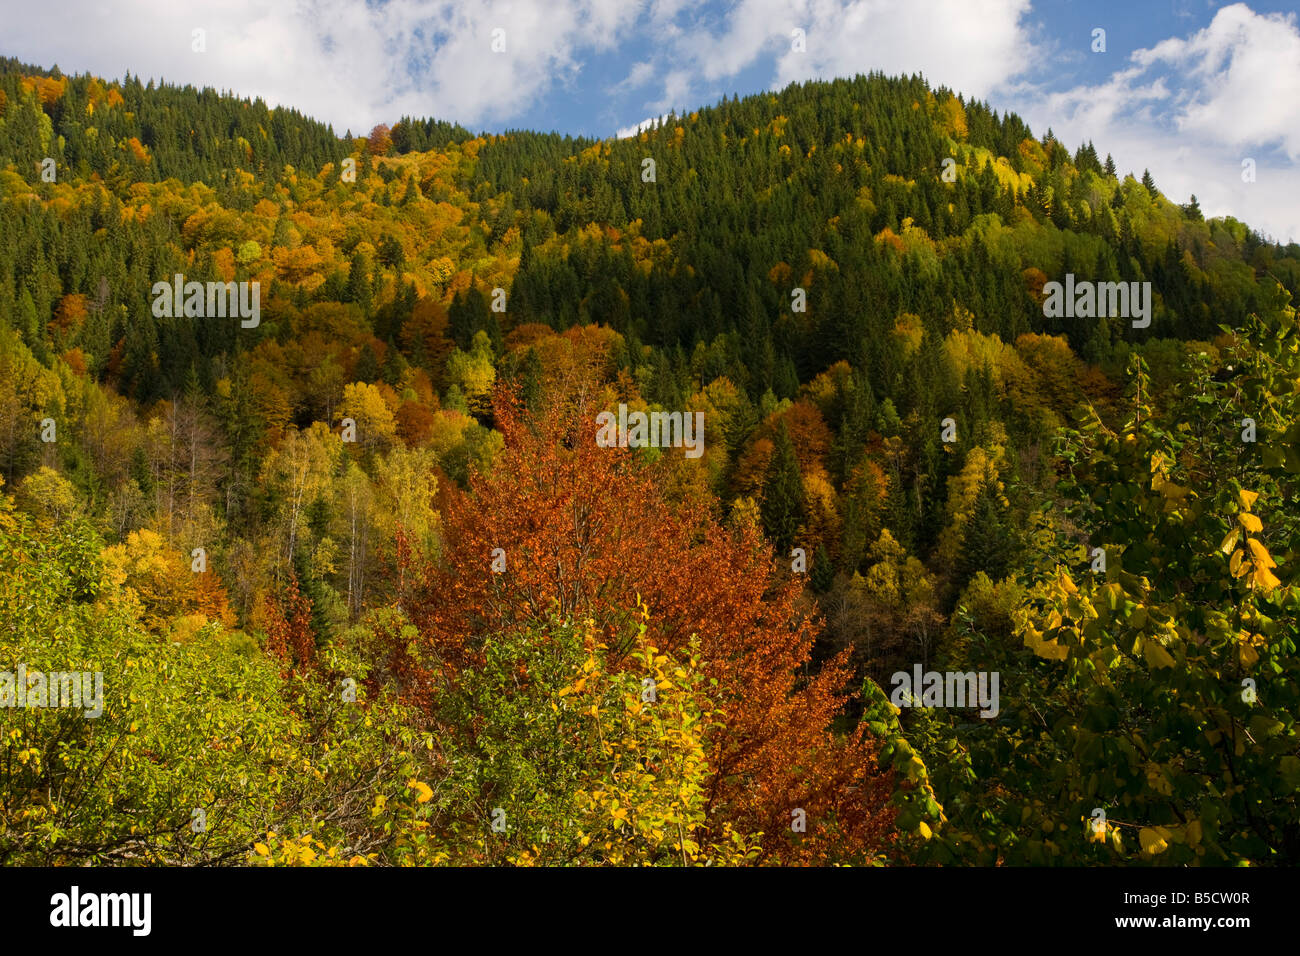 Mixed forest with beech Norway spruce birch rowan and Wych elm in autumn on mountain slopes in the Lotrulu Mountains romania Stock Photo